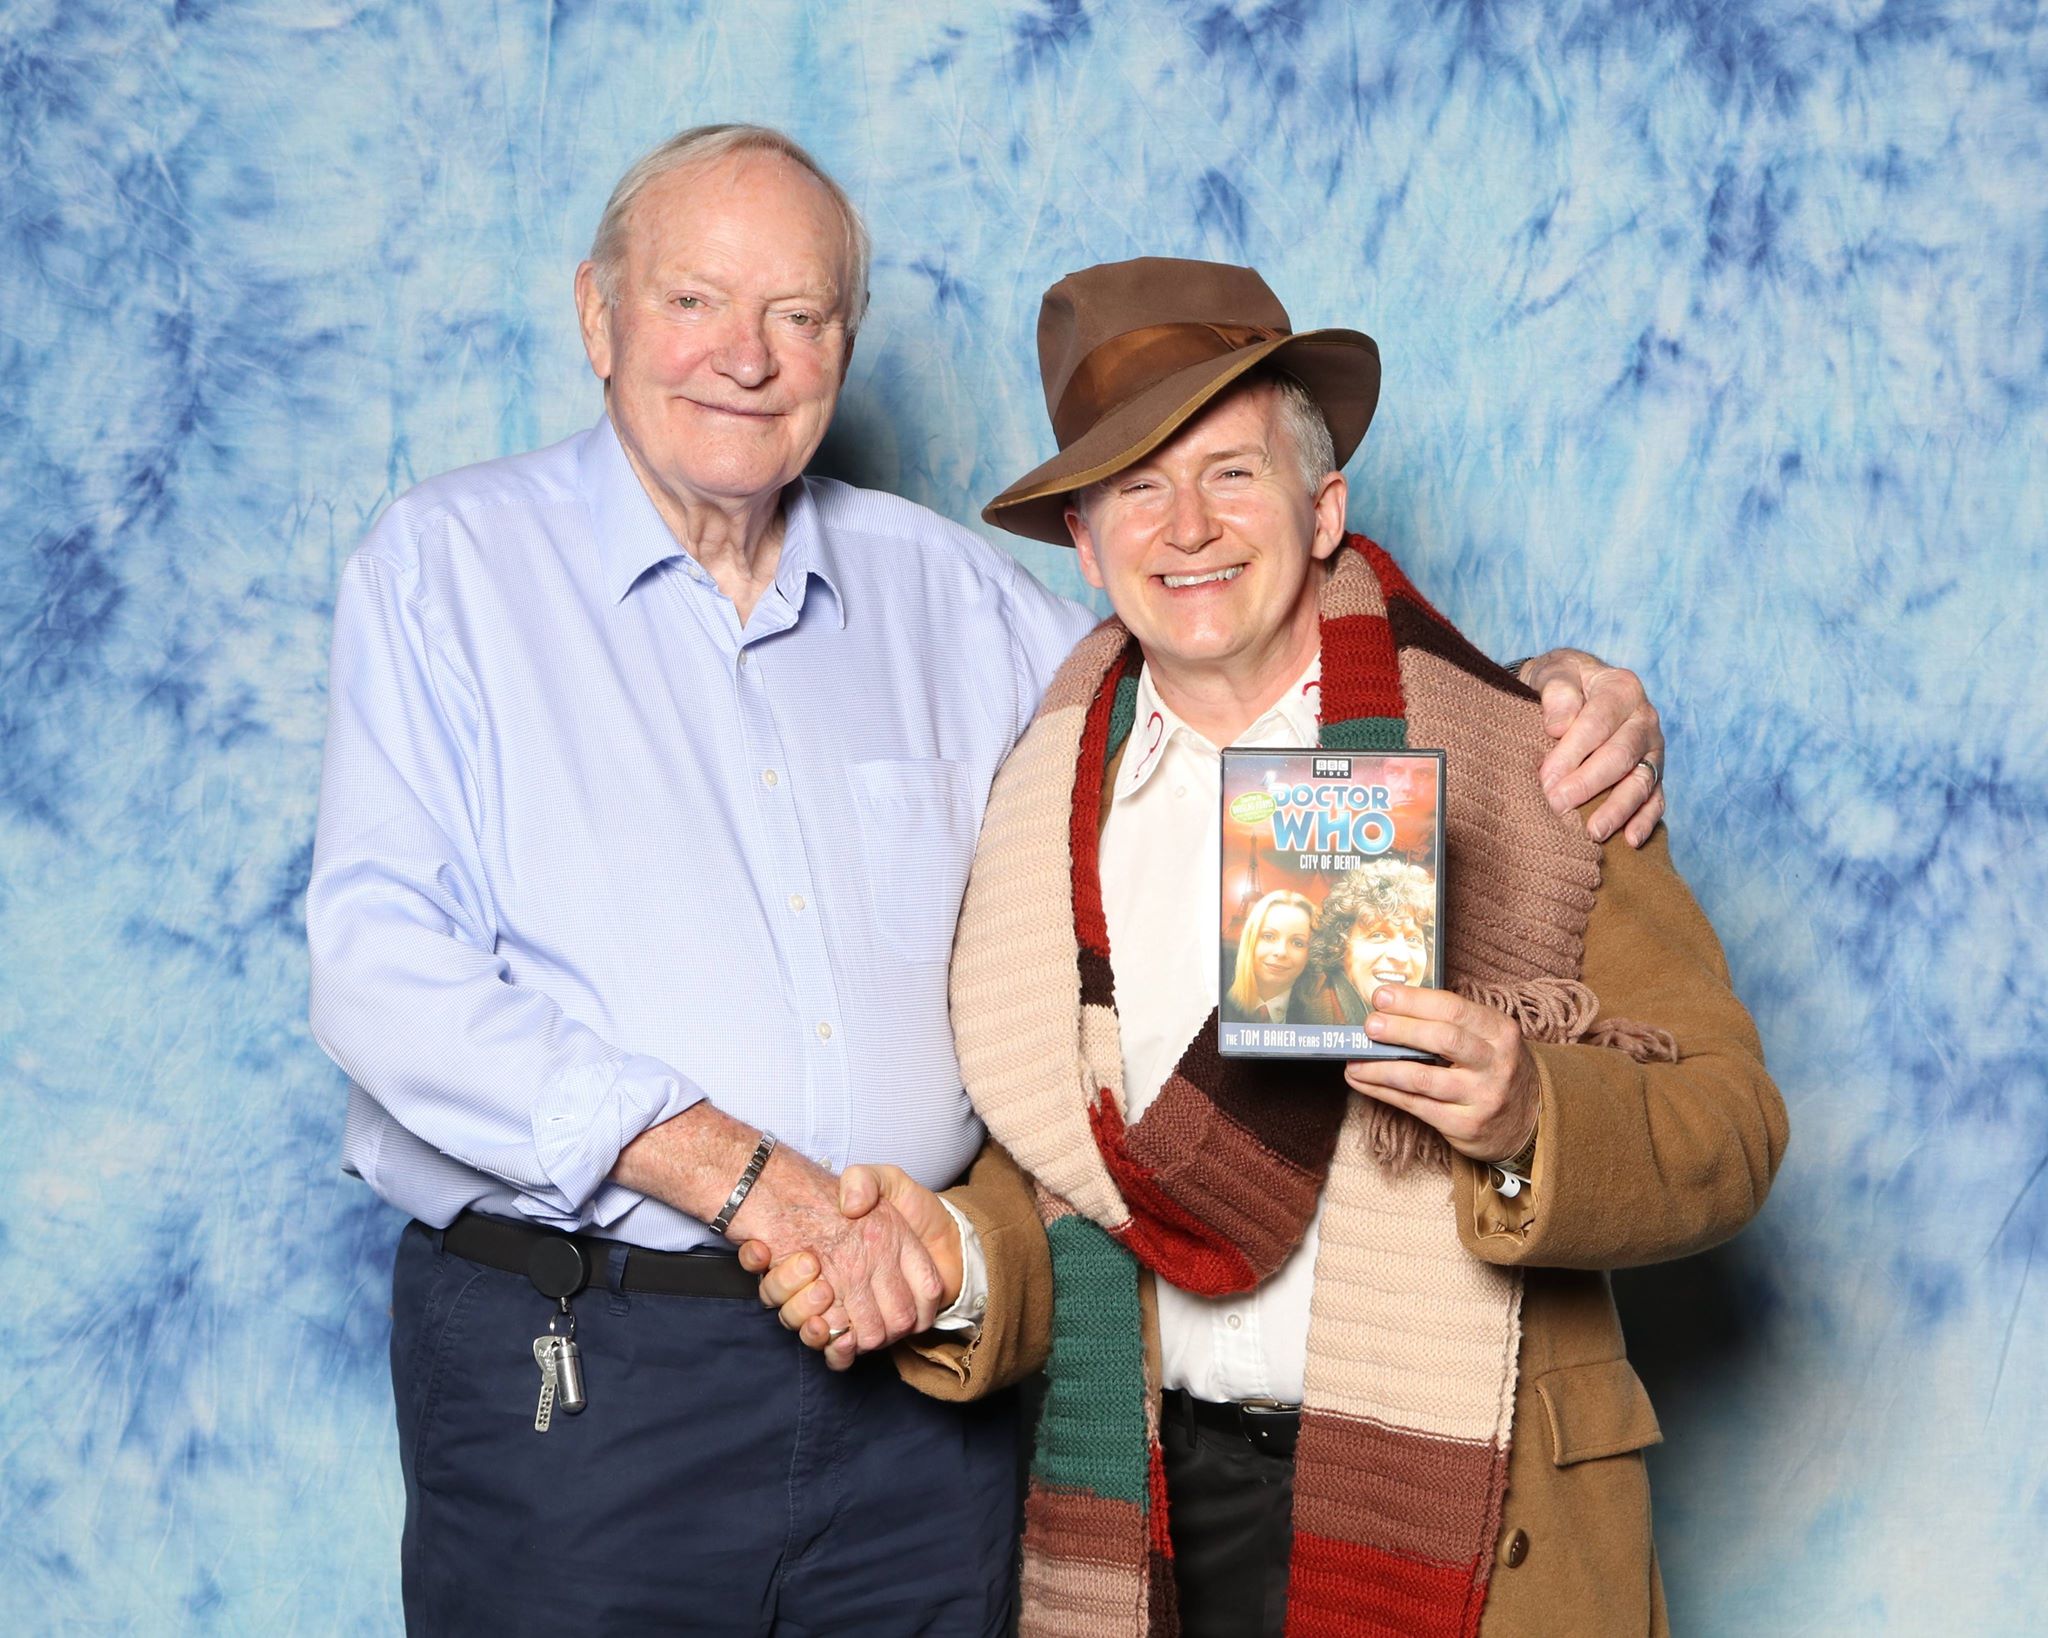 Julian Glover (AT-AT Commander General Veers, from Empire Strikes Back)